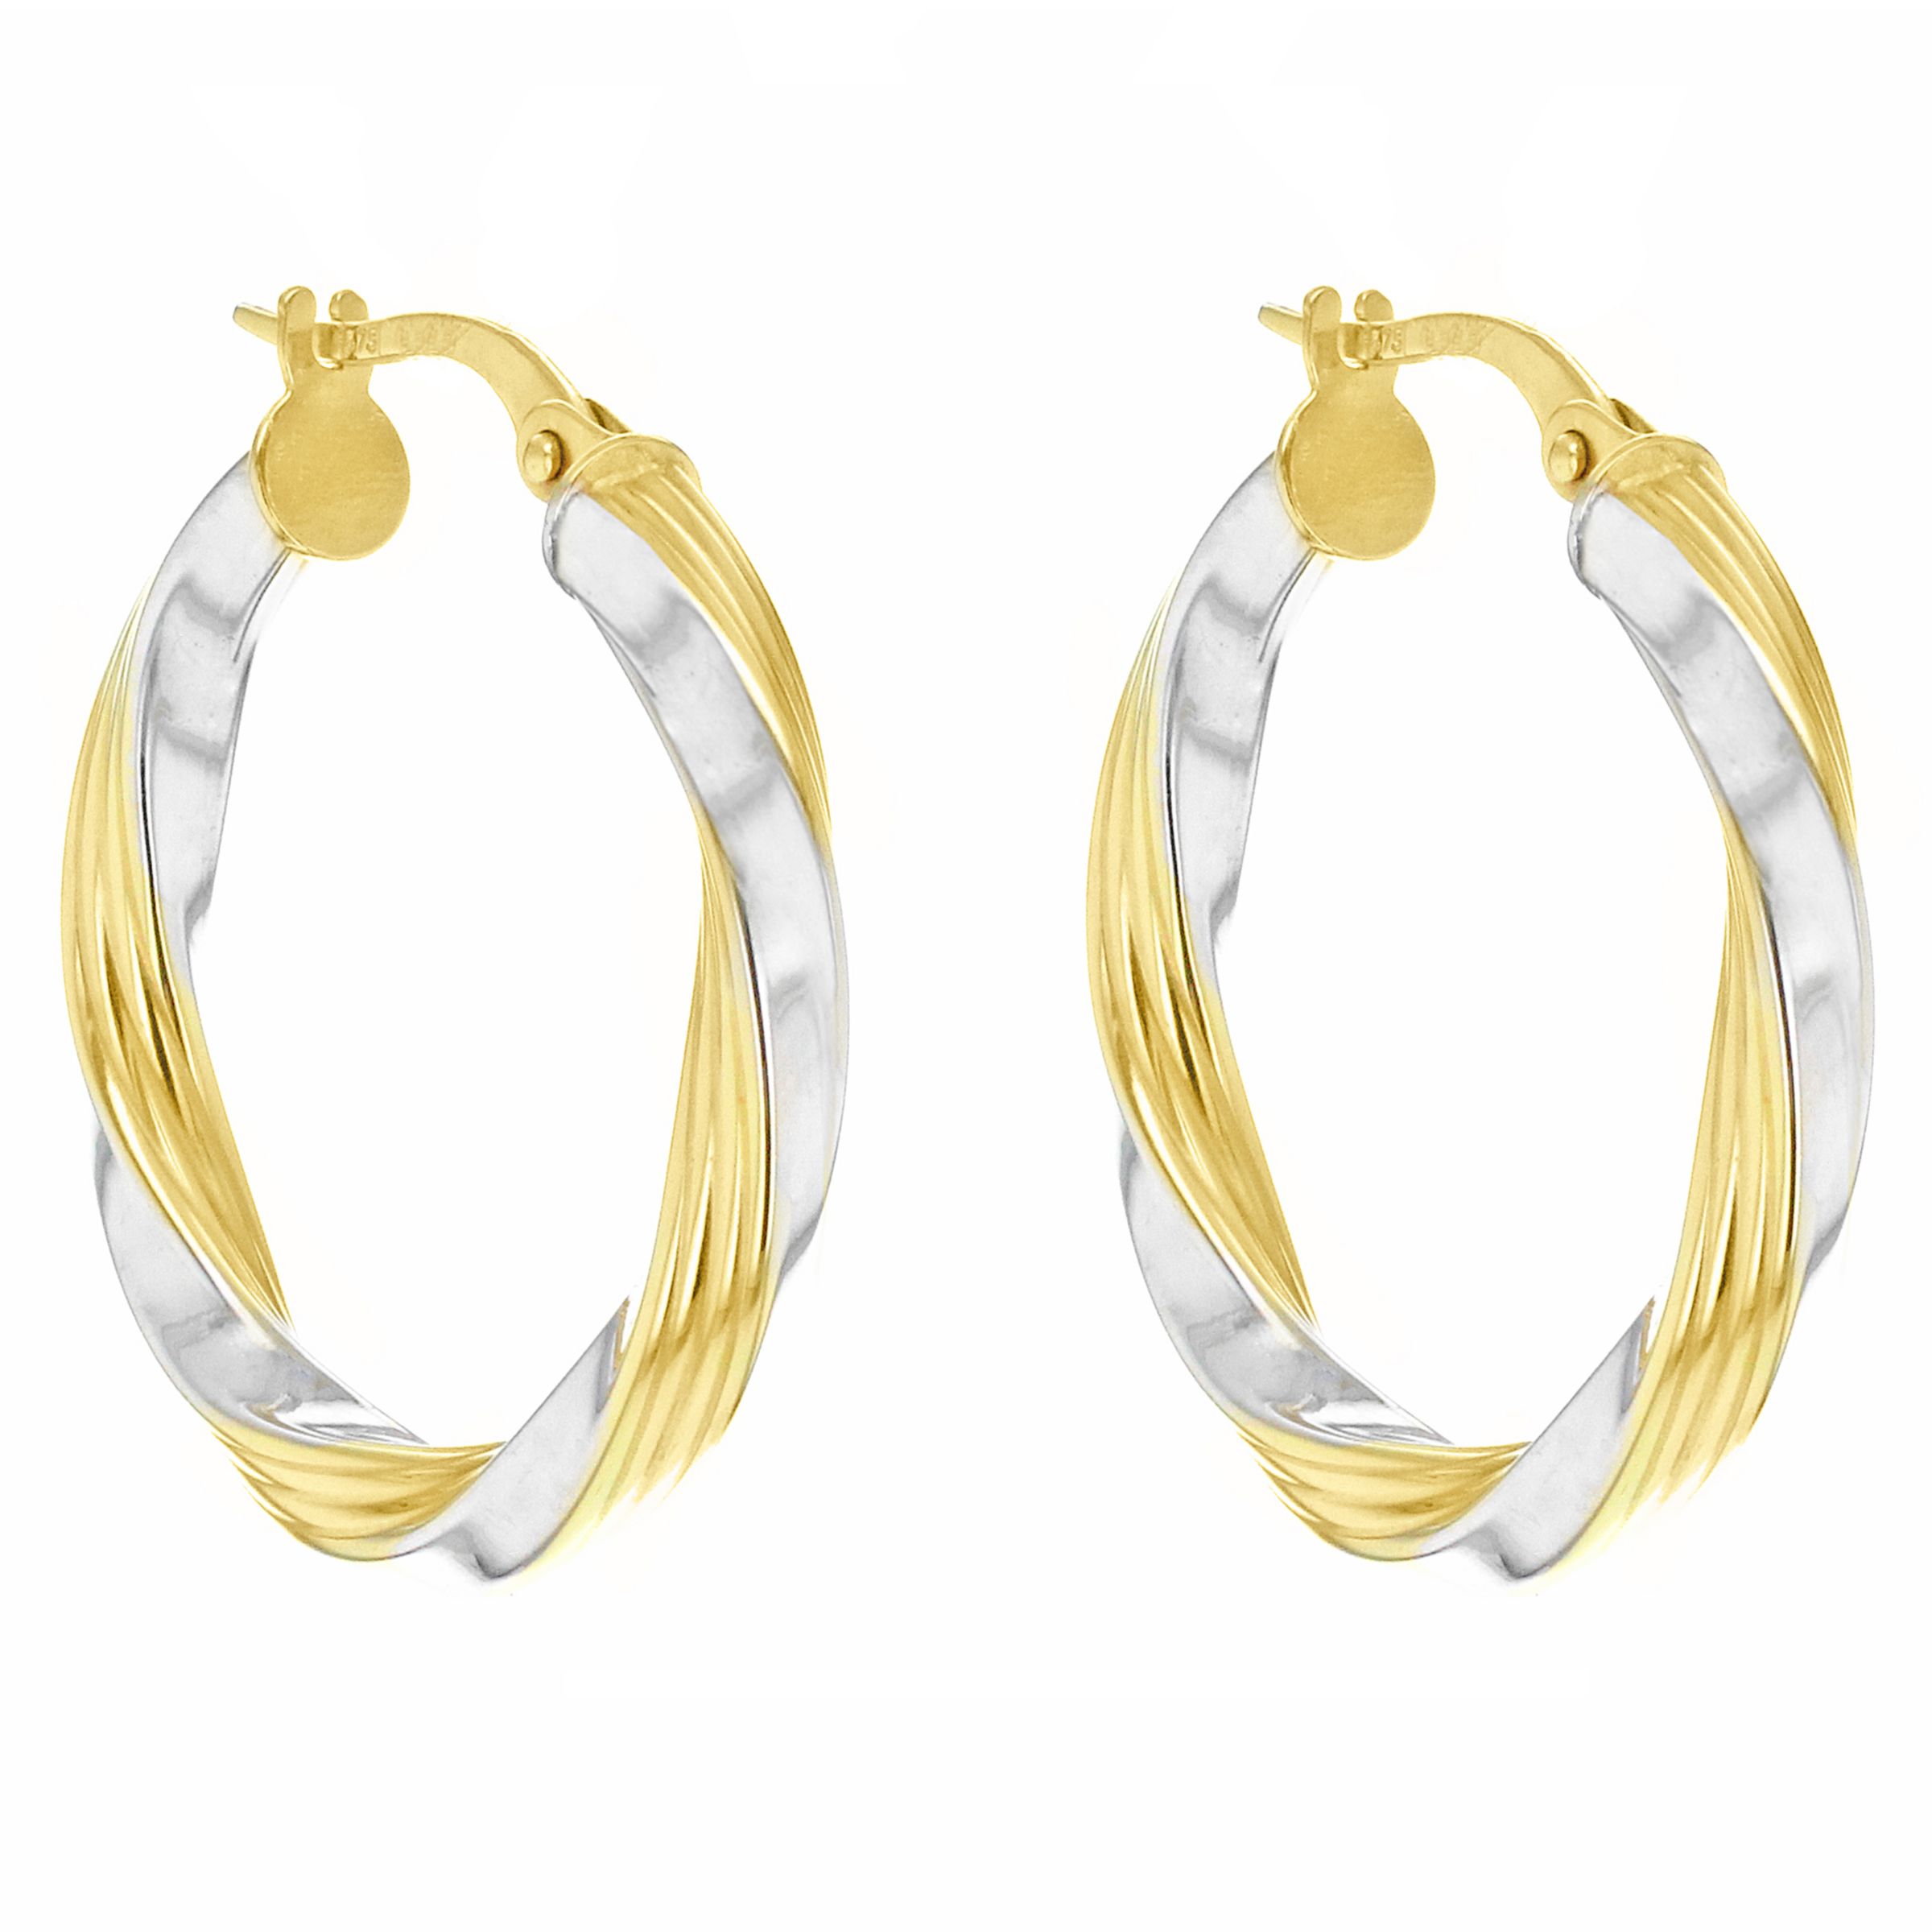 IBB 9ct Gold Two Colour Creole Twist Earrings, Gold/White Gold